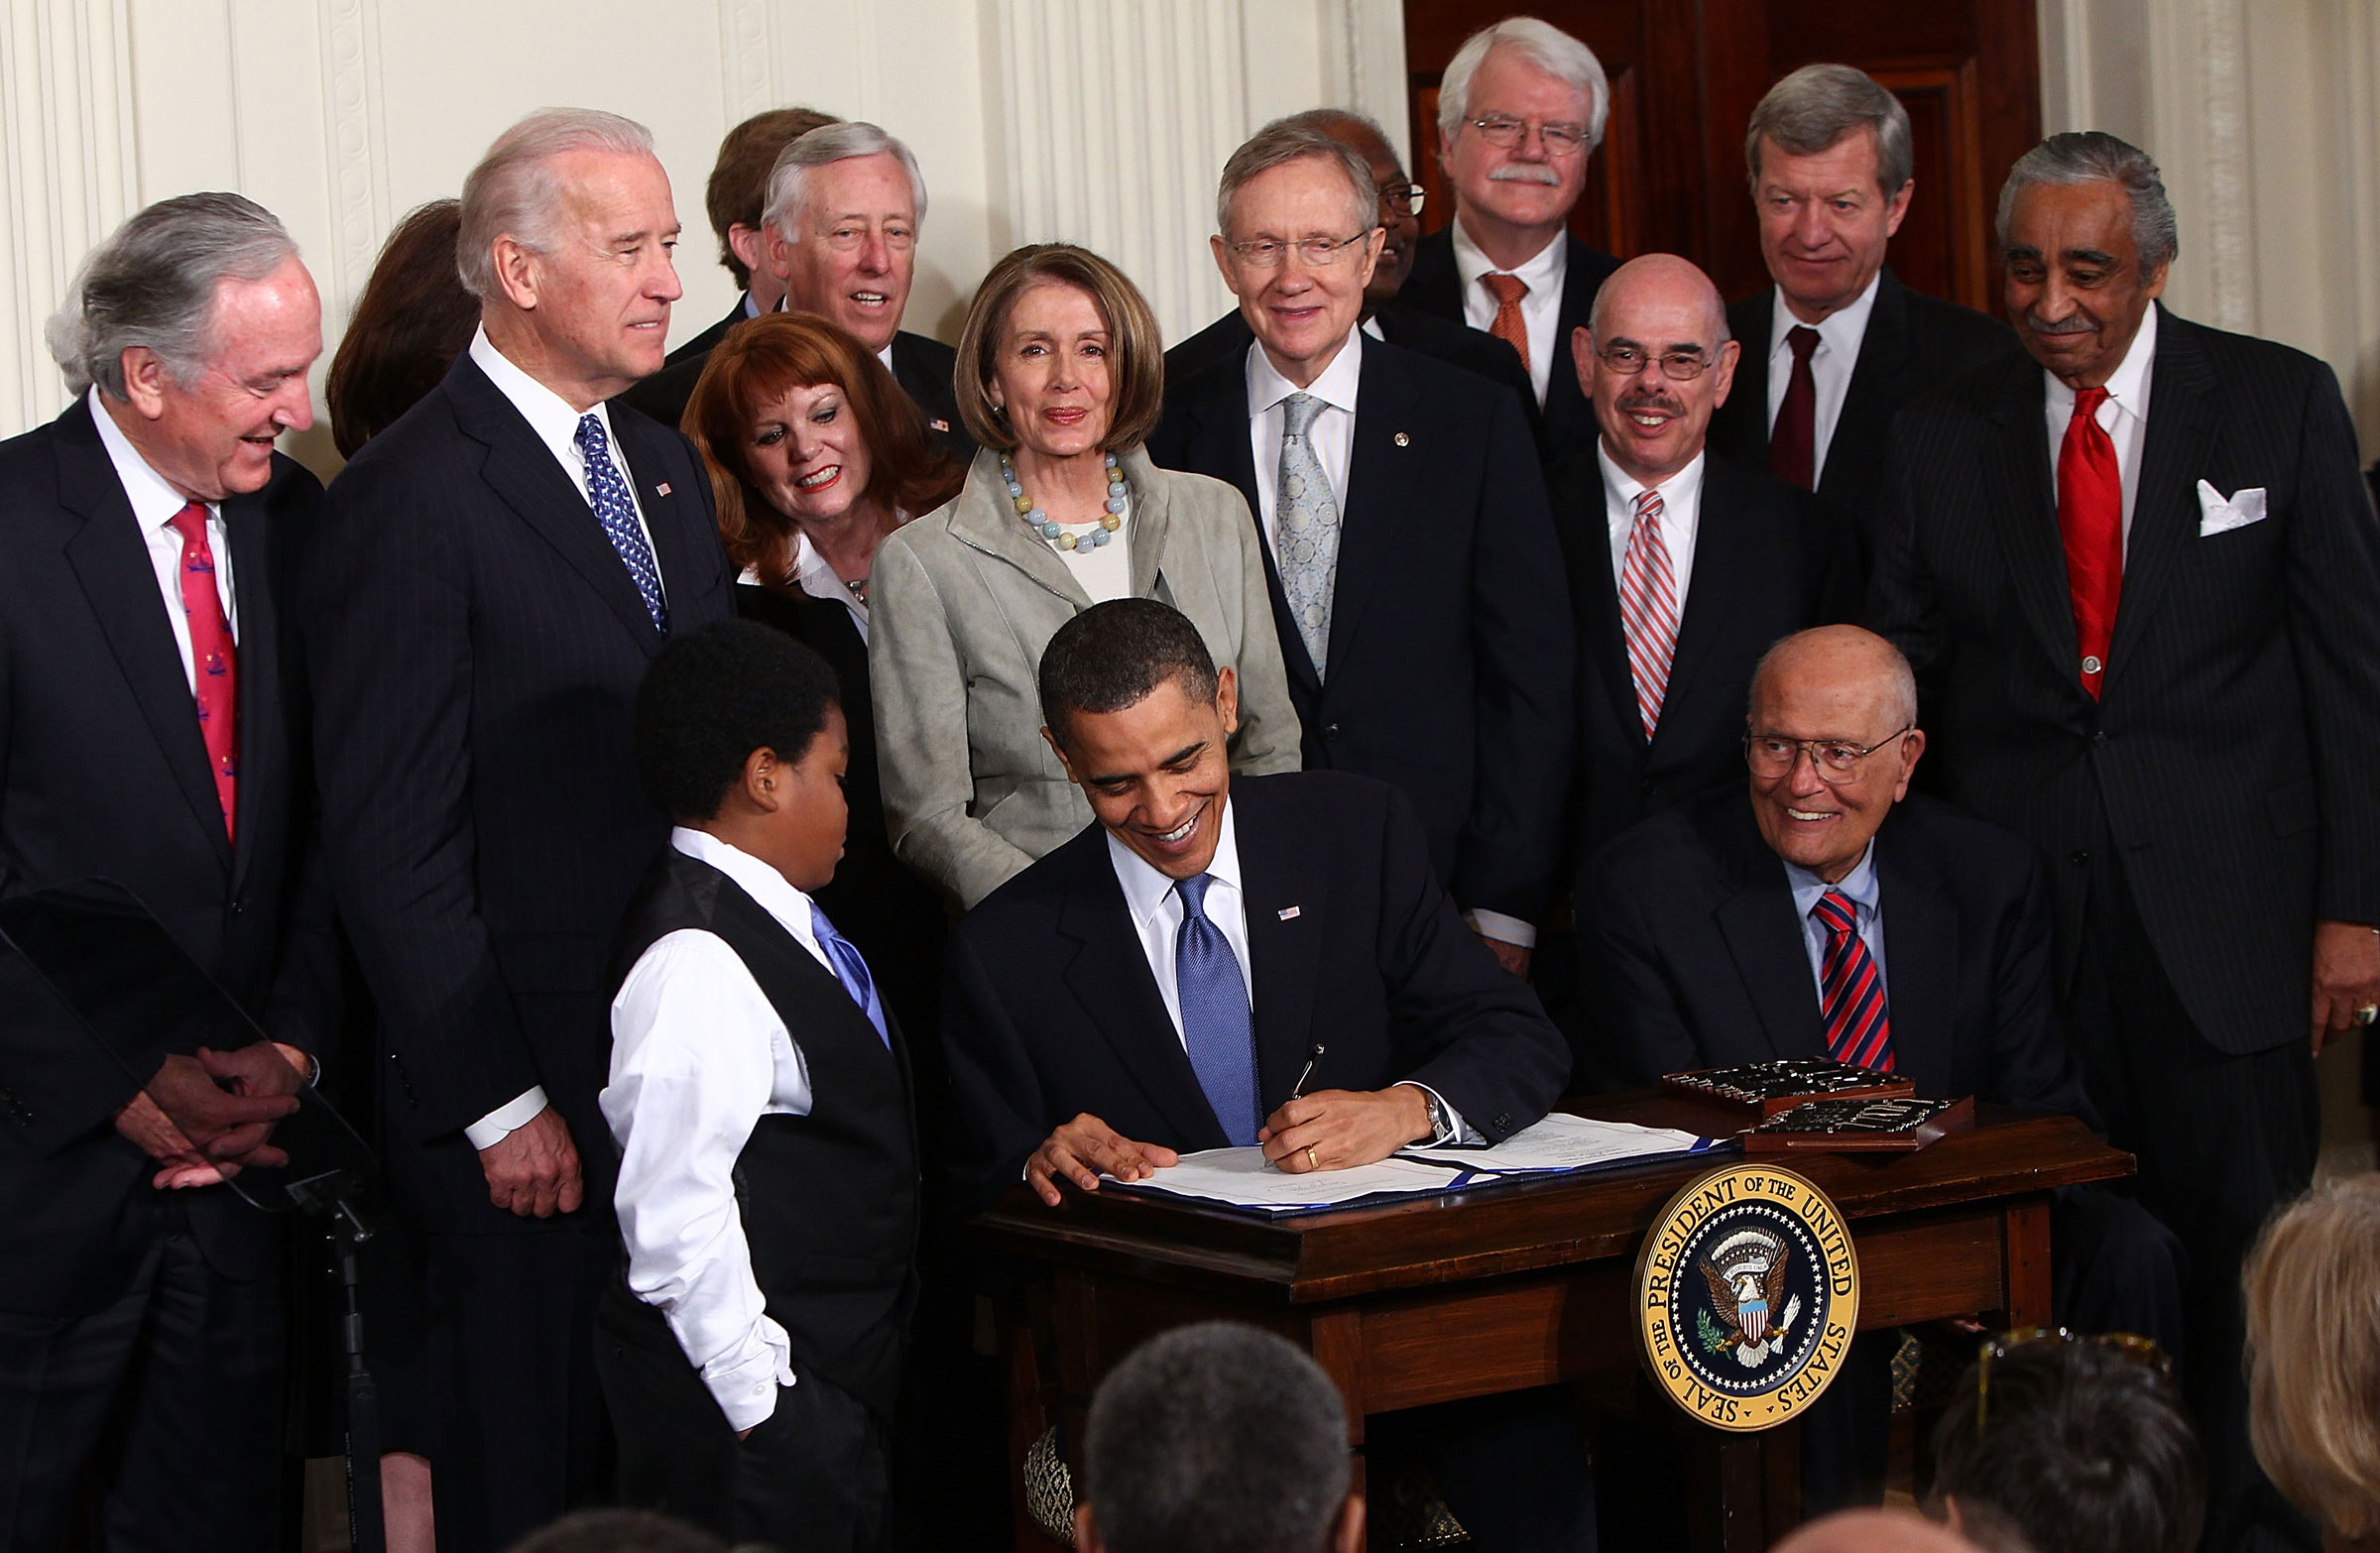 Speaker of the House Nancy Pelosi stands behind President Barack Obama as he signs the Affordable Health Care for America Act during a ceremony with fellow Democrats in the East Room of the White House on March 23, 2010. (Win McNamee—Getty Images)